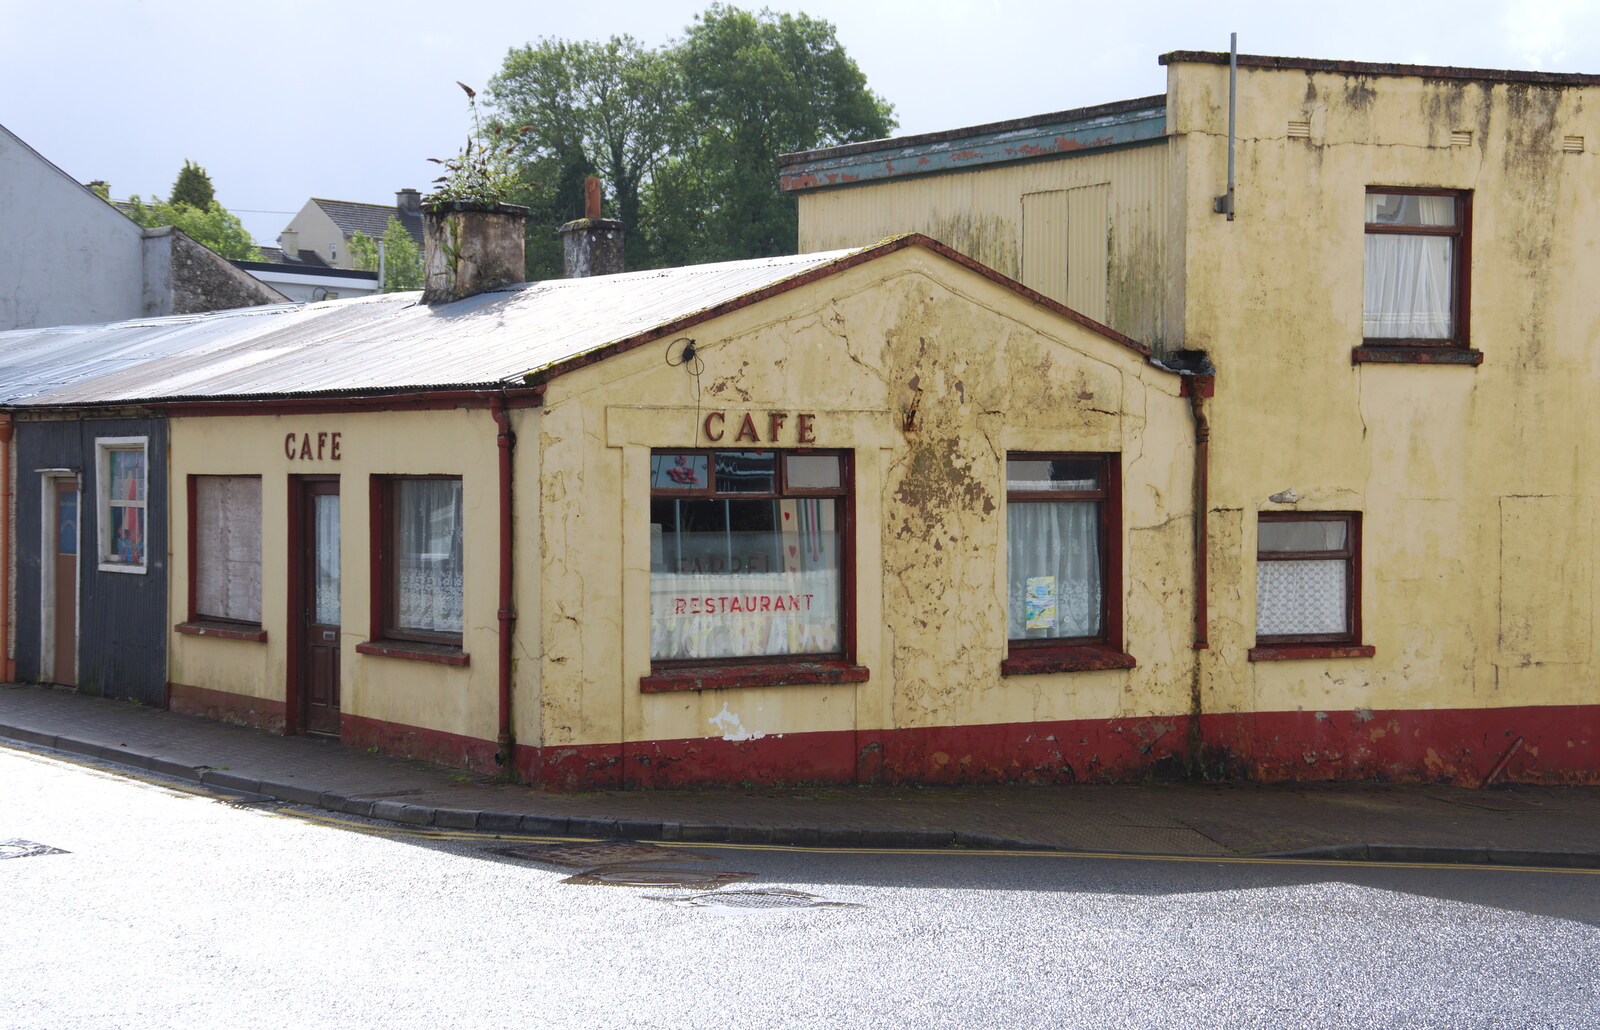 There's a more derelict café across the road from Glencar Waterfall and Parke's Castle, Kilmore, Leitrim, Ireland - 18th August 2019